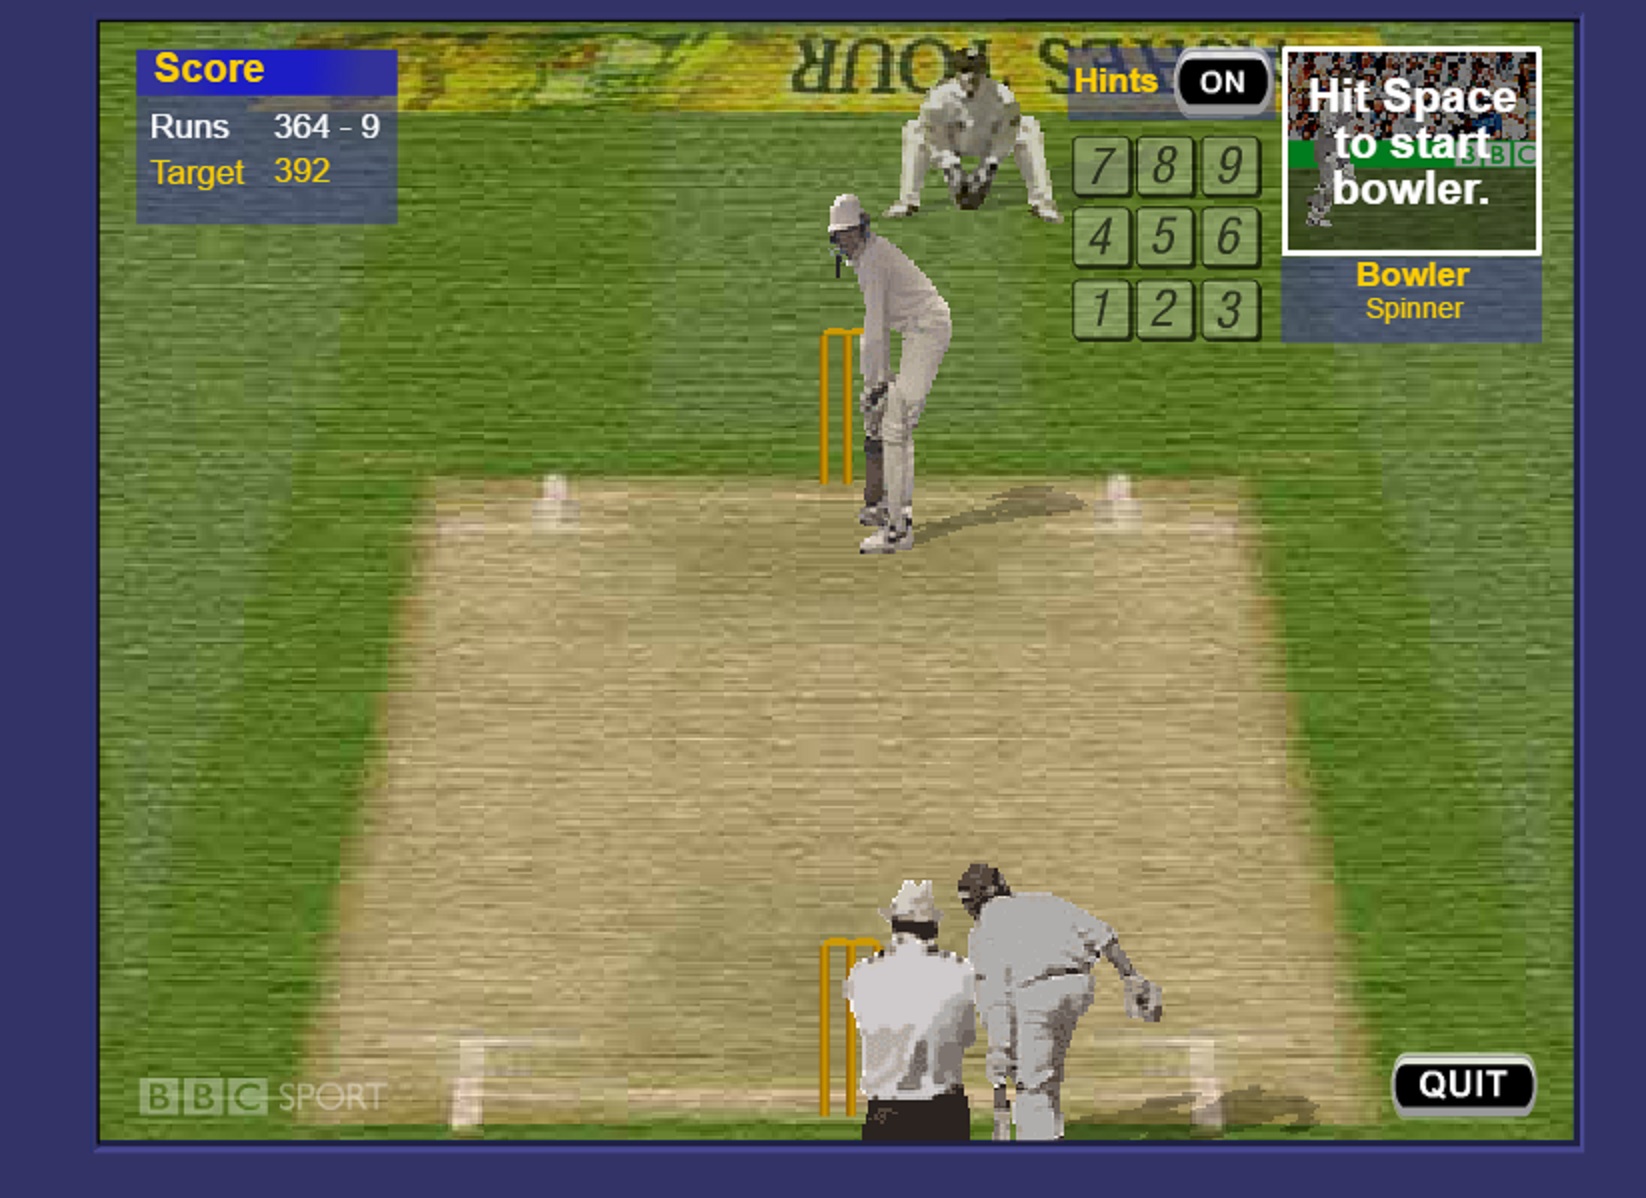 A screen grab of BBC Sport's 'Last Man Standing' computer game